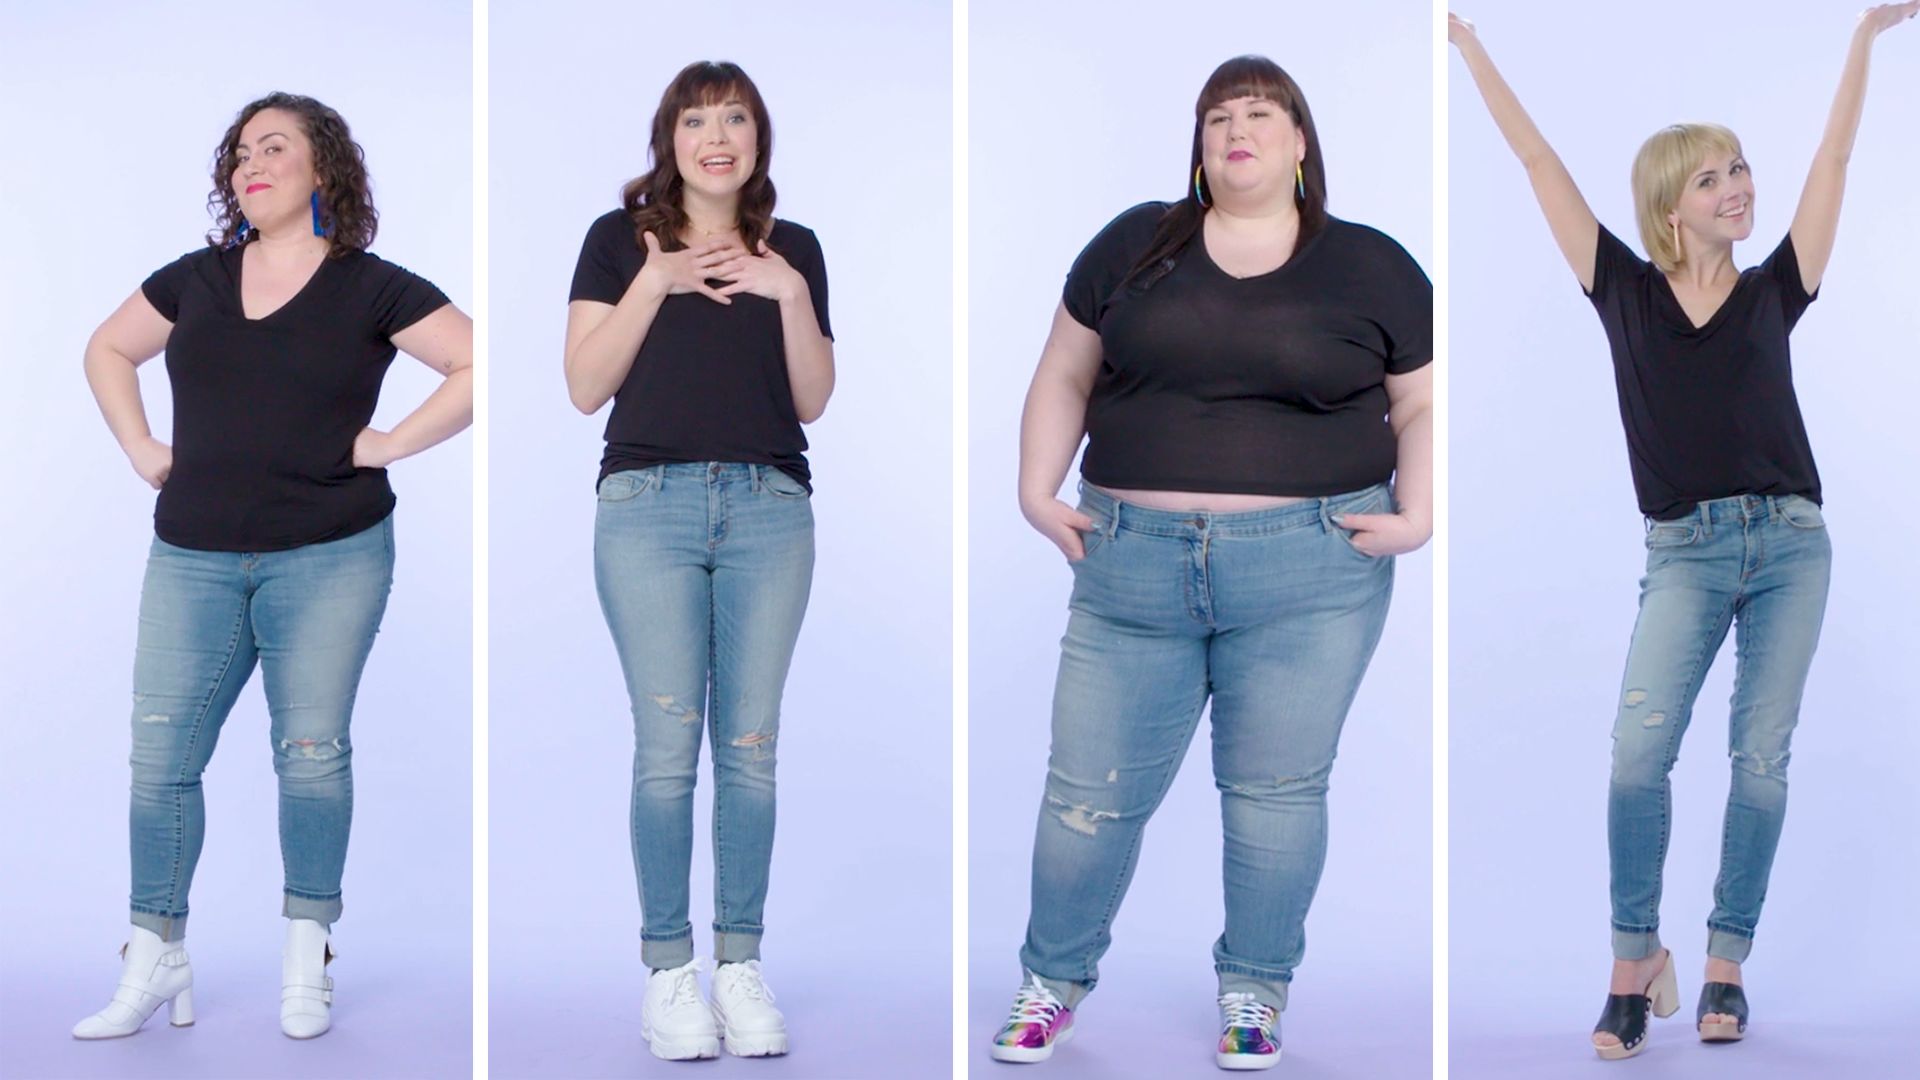 Watch Women Sizes 0 Through 28 Try on the Same Skinny Jeans, Body Talk